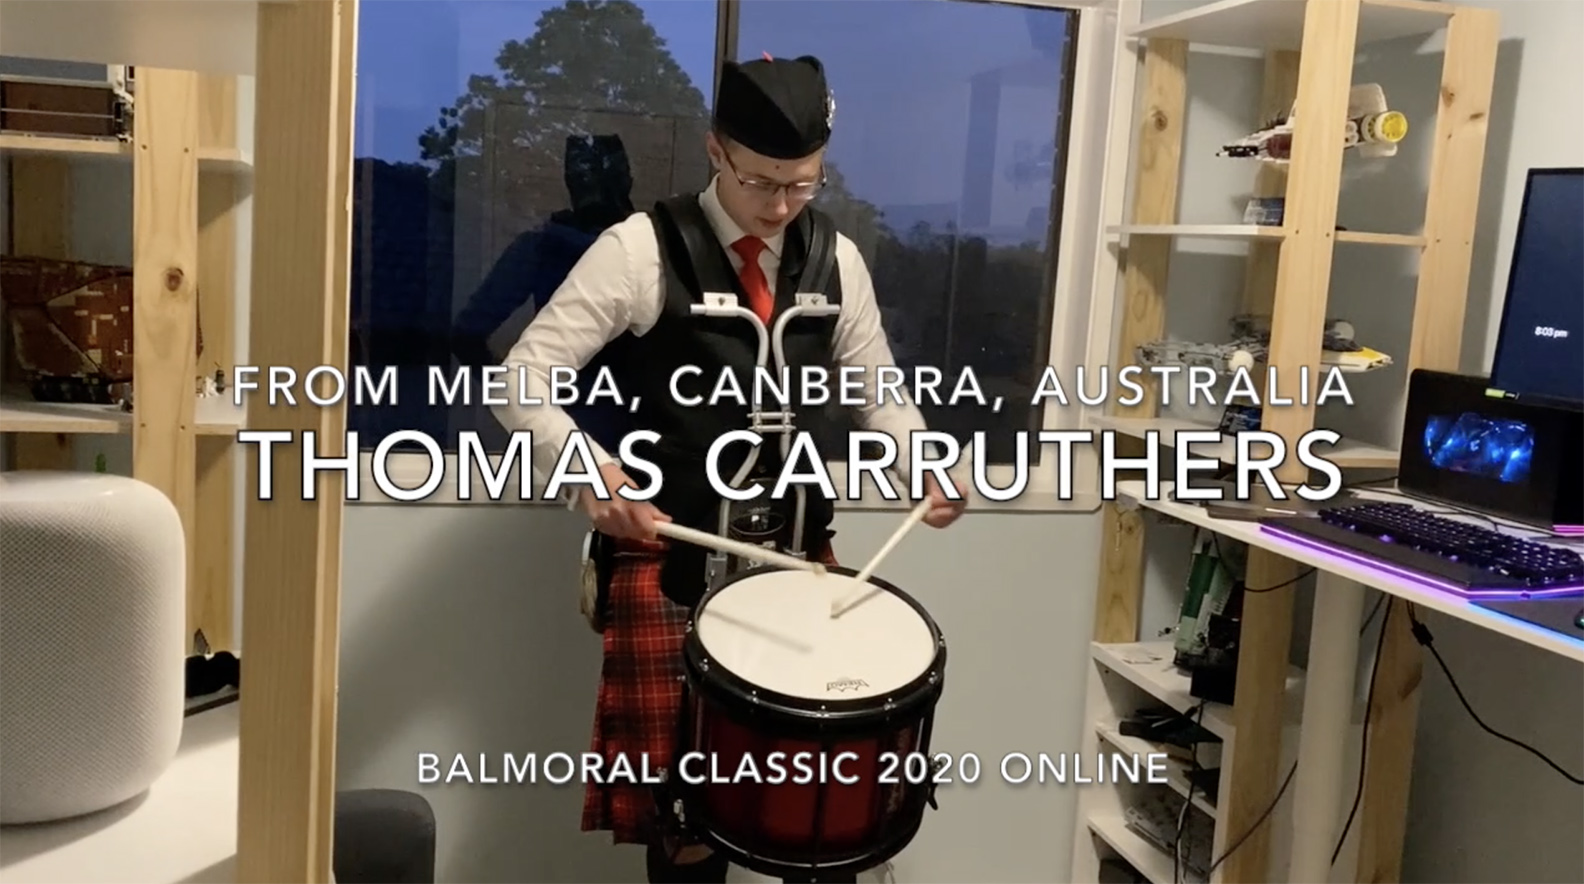 Overall Drumming winner for the 2020 Balmoral Classic Online.